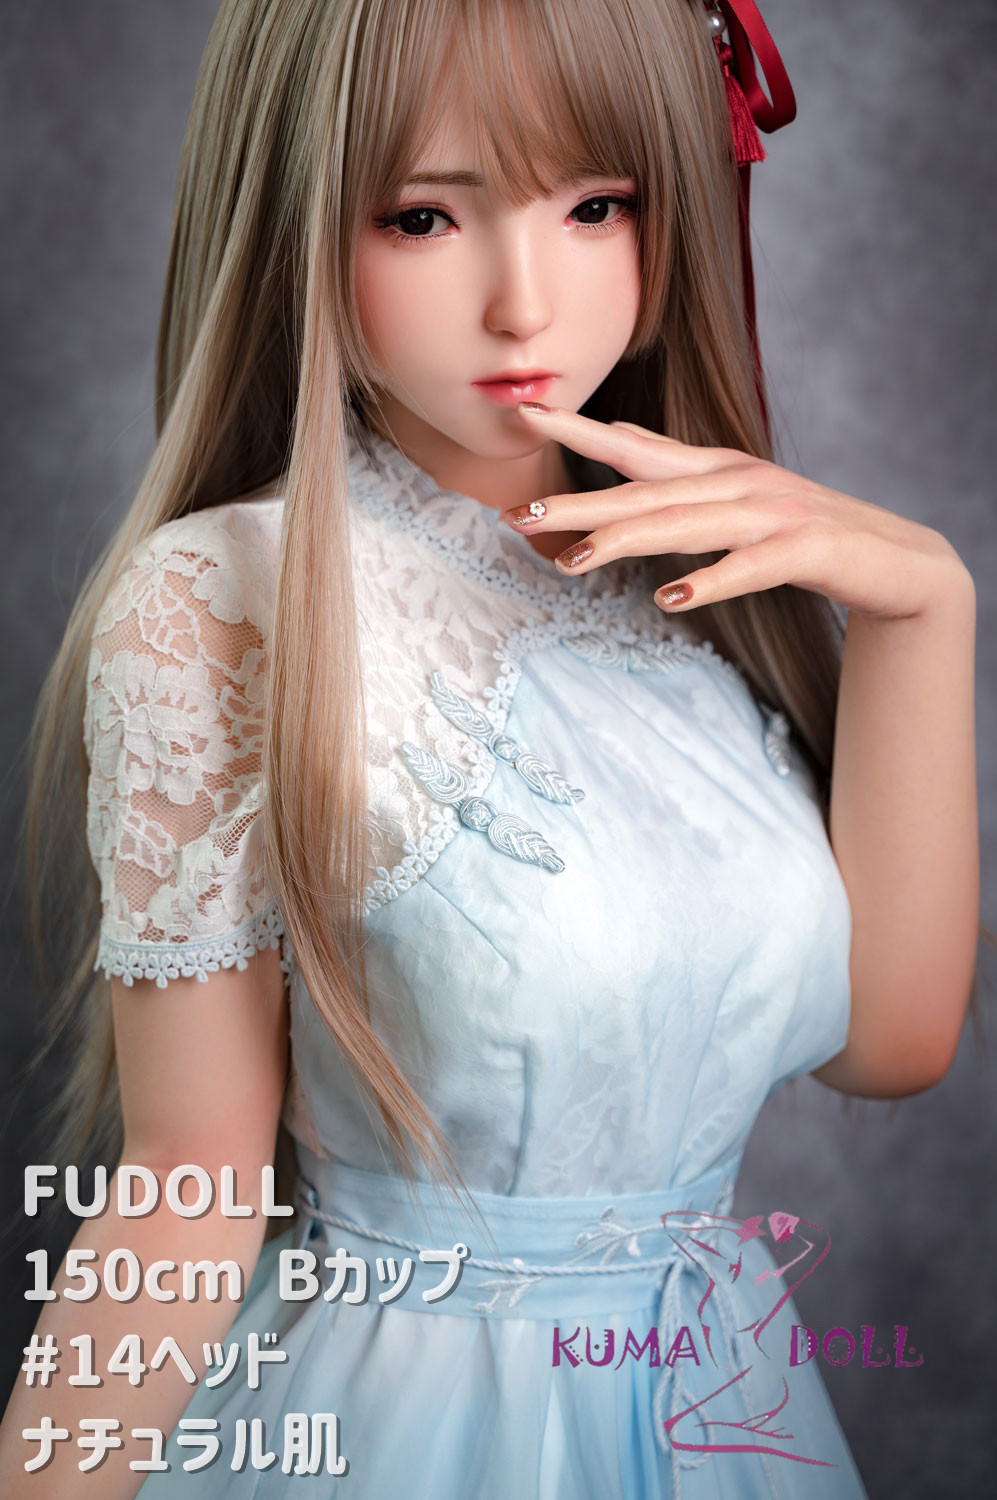 FUDOLL #14頭部 Brand New Love Doll 150cm B Cup Premium Silicone Head Body Material and Height